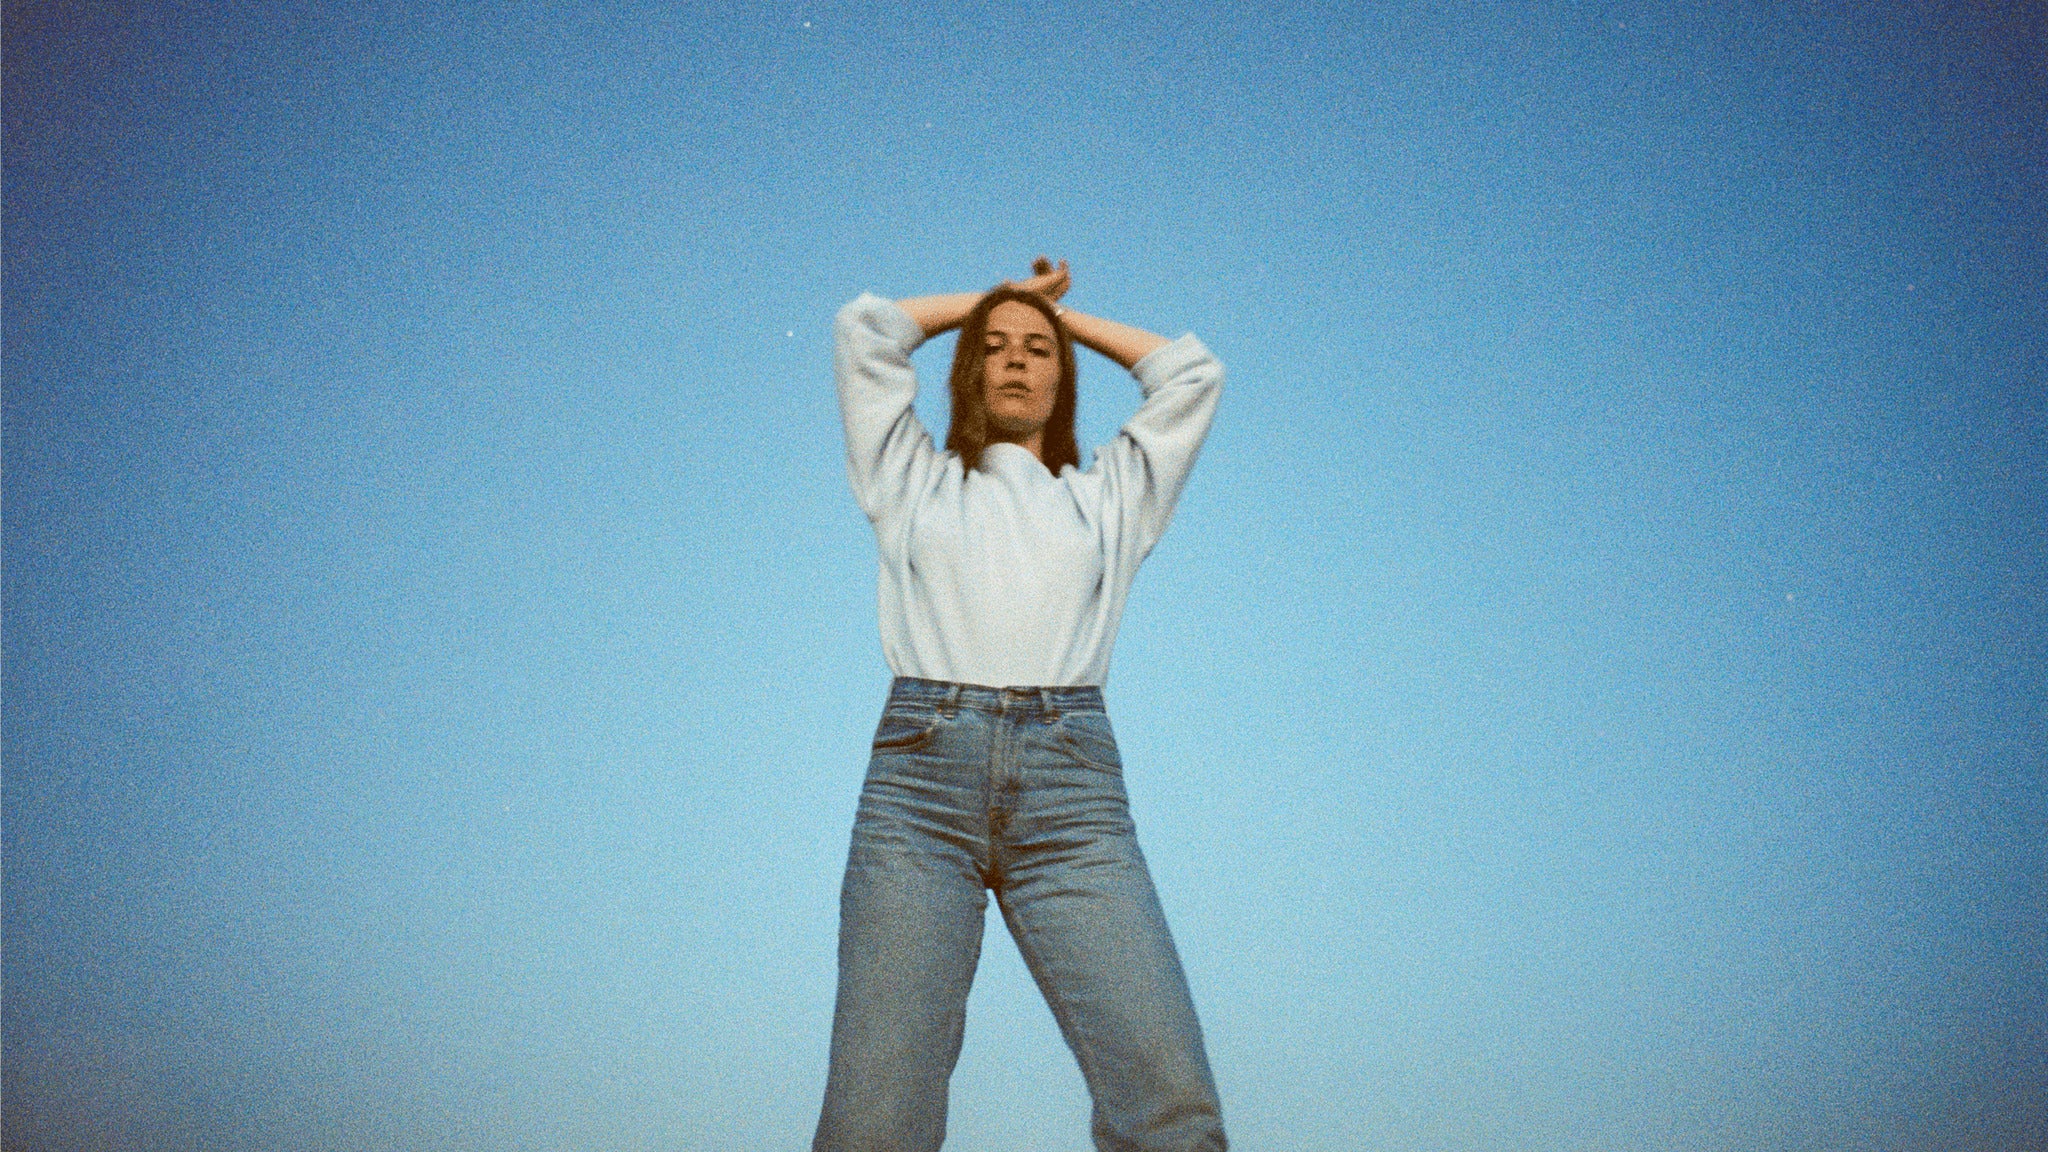 Maggie Rogers in Houston event information